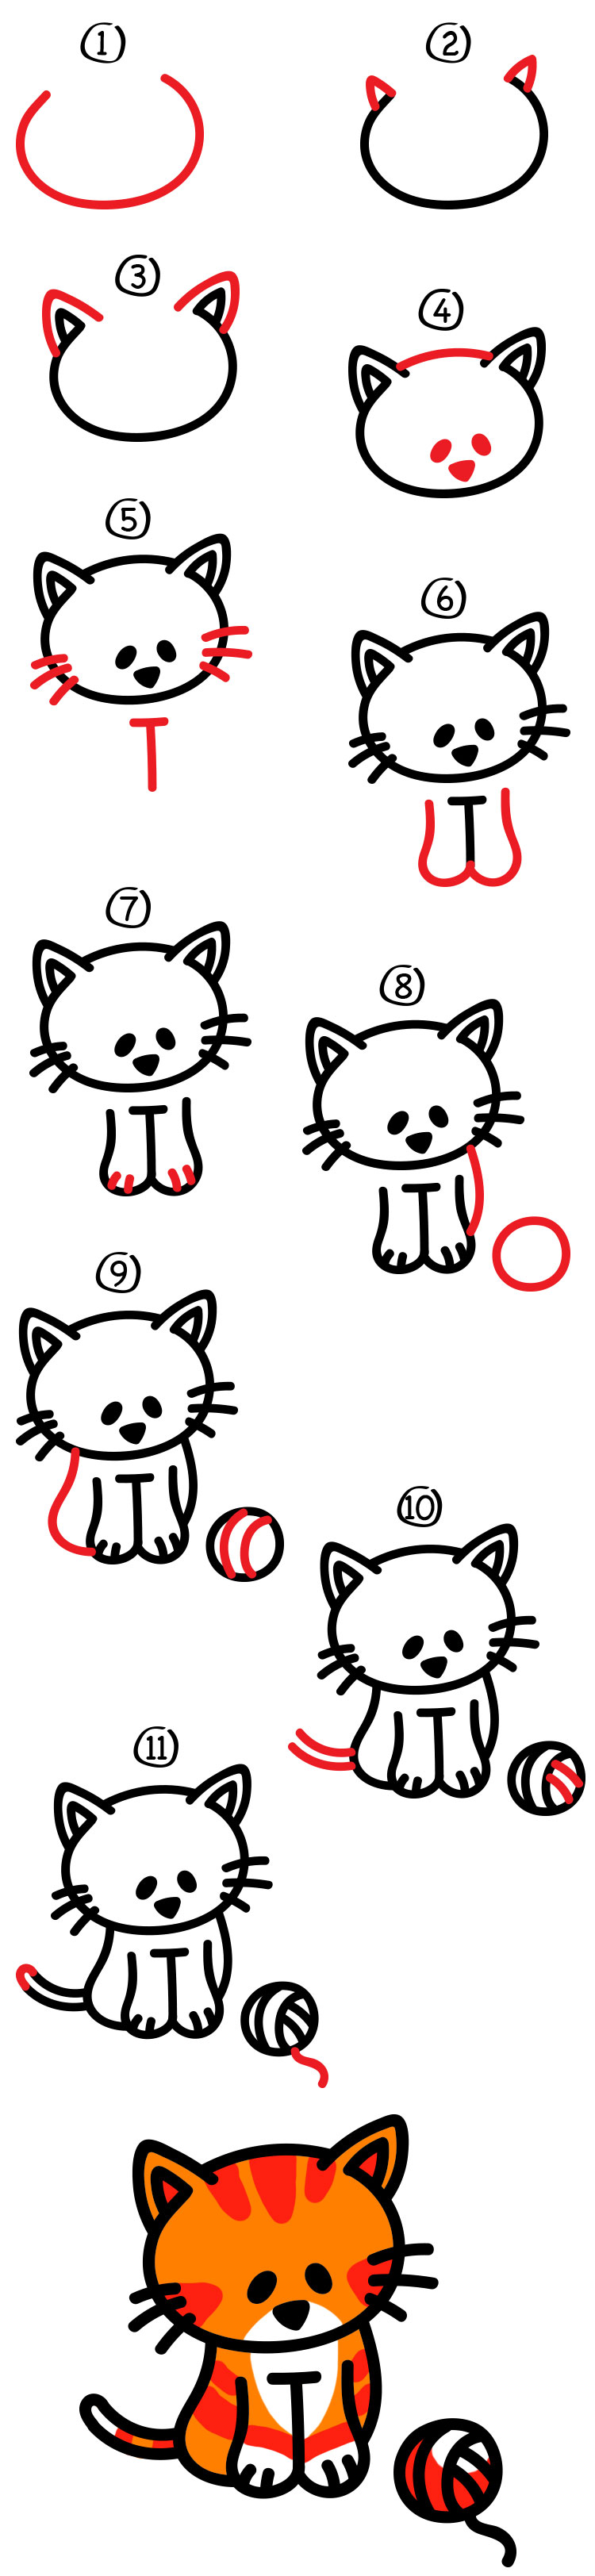 How To Draw A Cartoon Cat Step By Step For Beginners